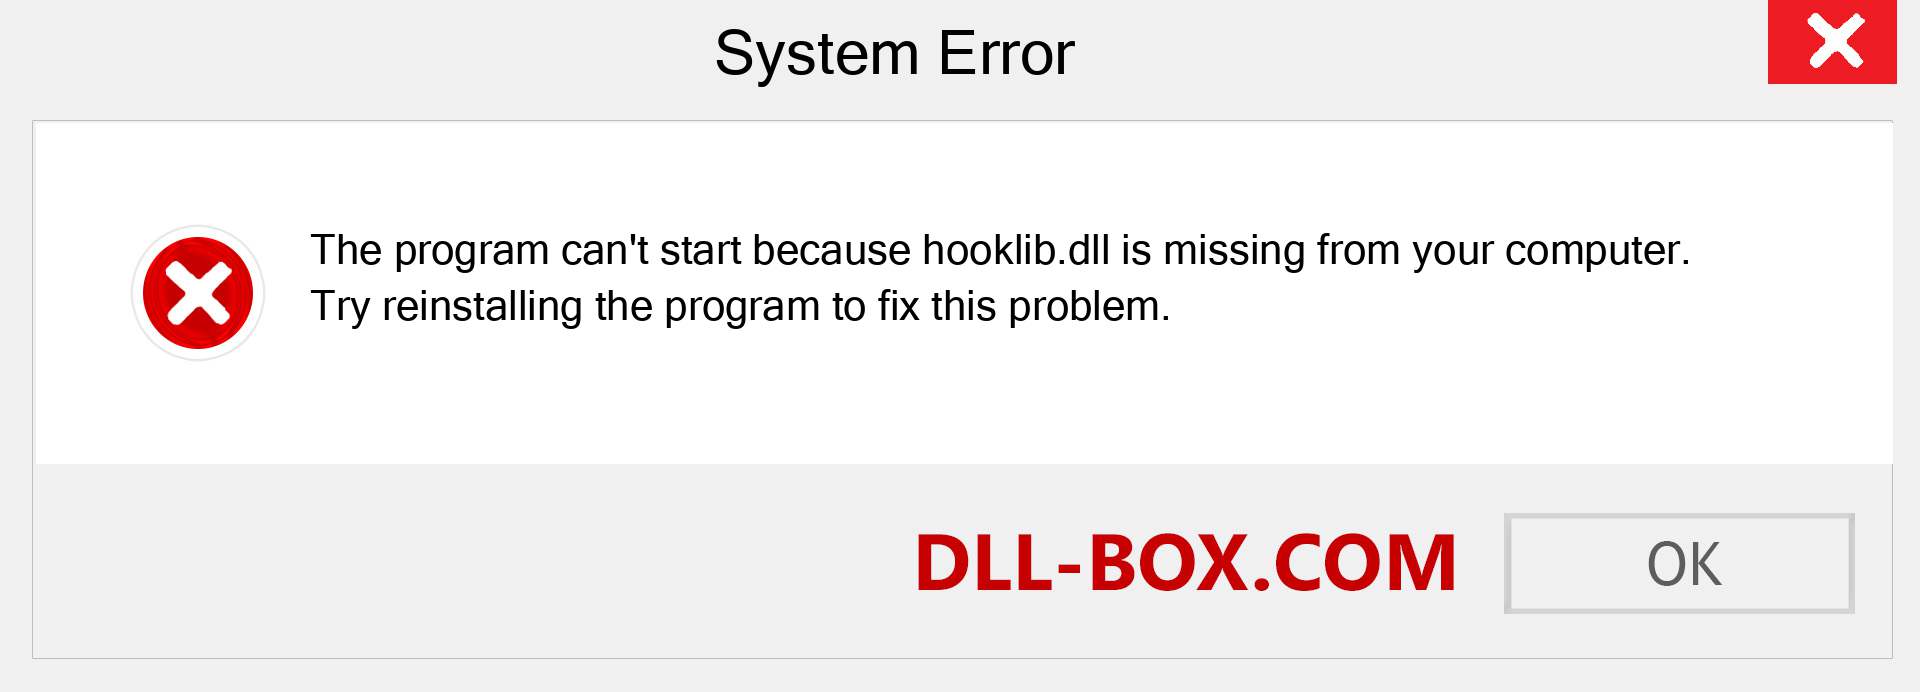  hooklib.dll file is missing?. Download for Windows 7, 8, 10 - Fix  hooklib dll Missing Error on Windows, photos, images